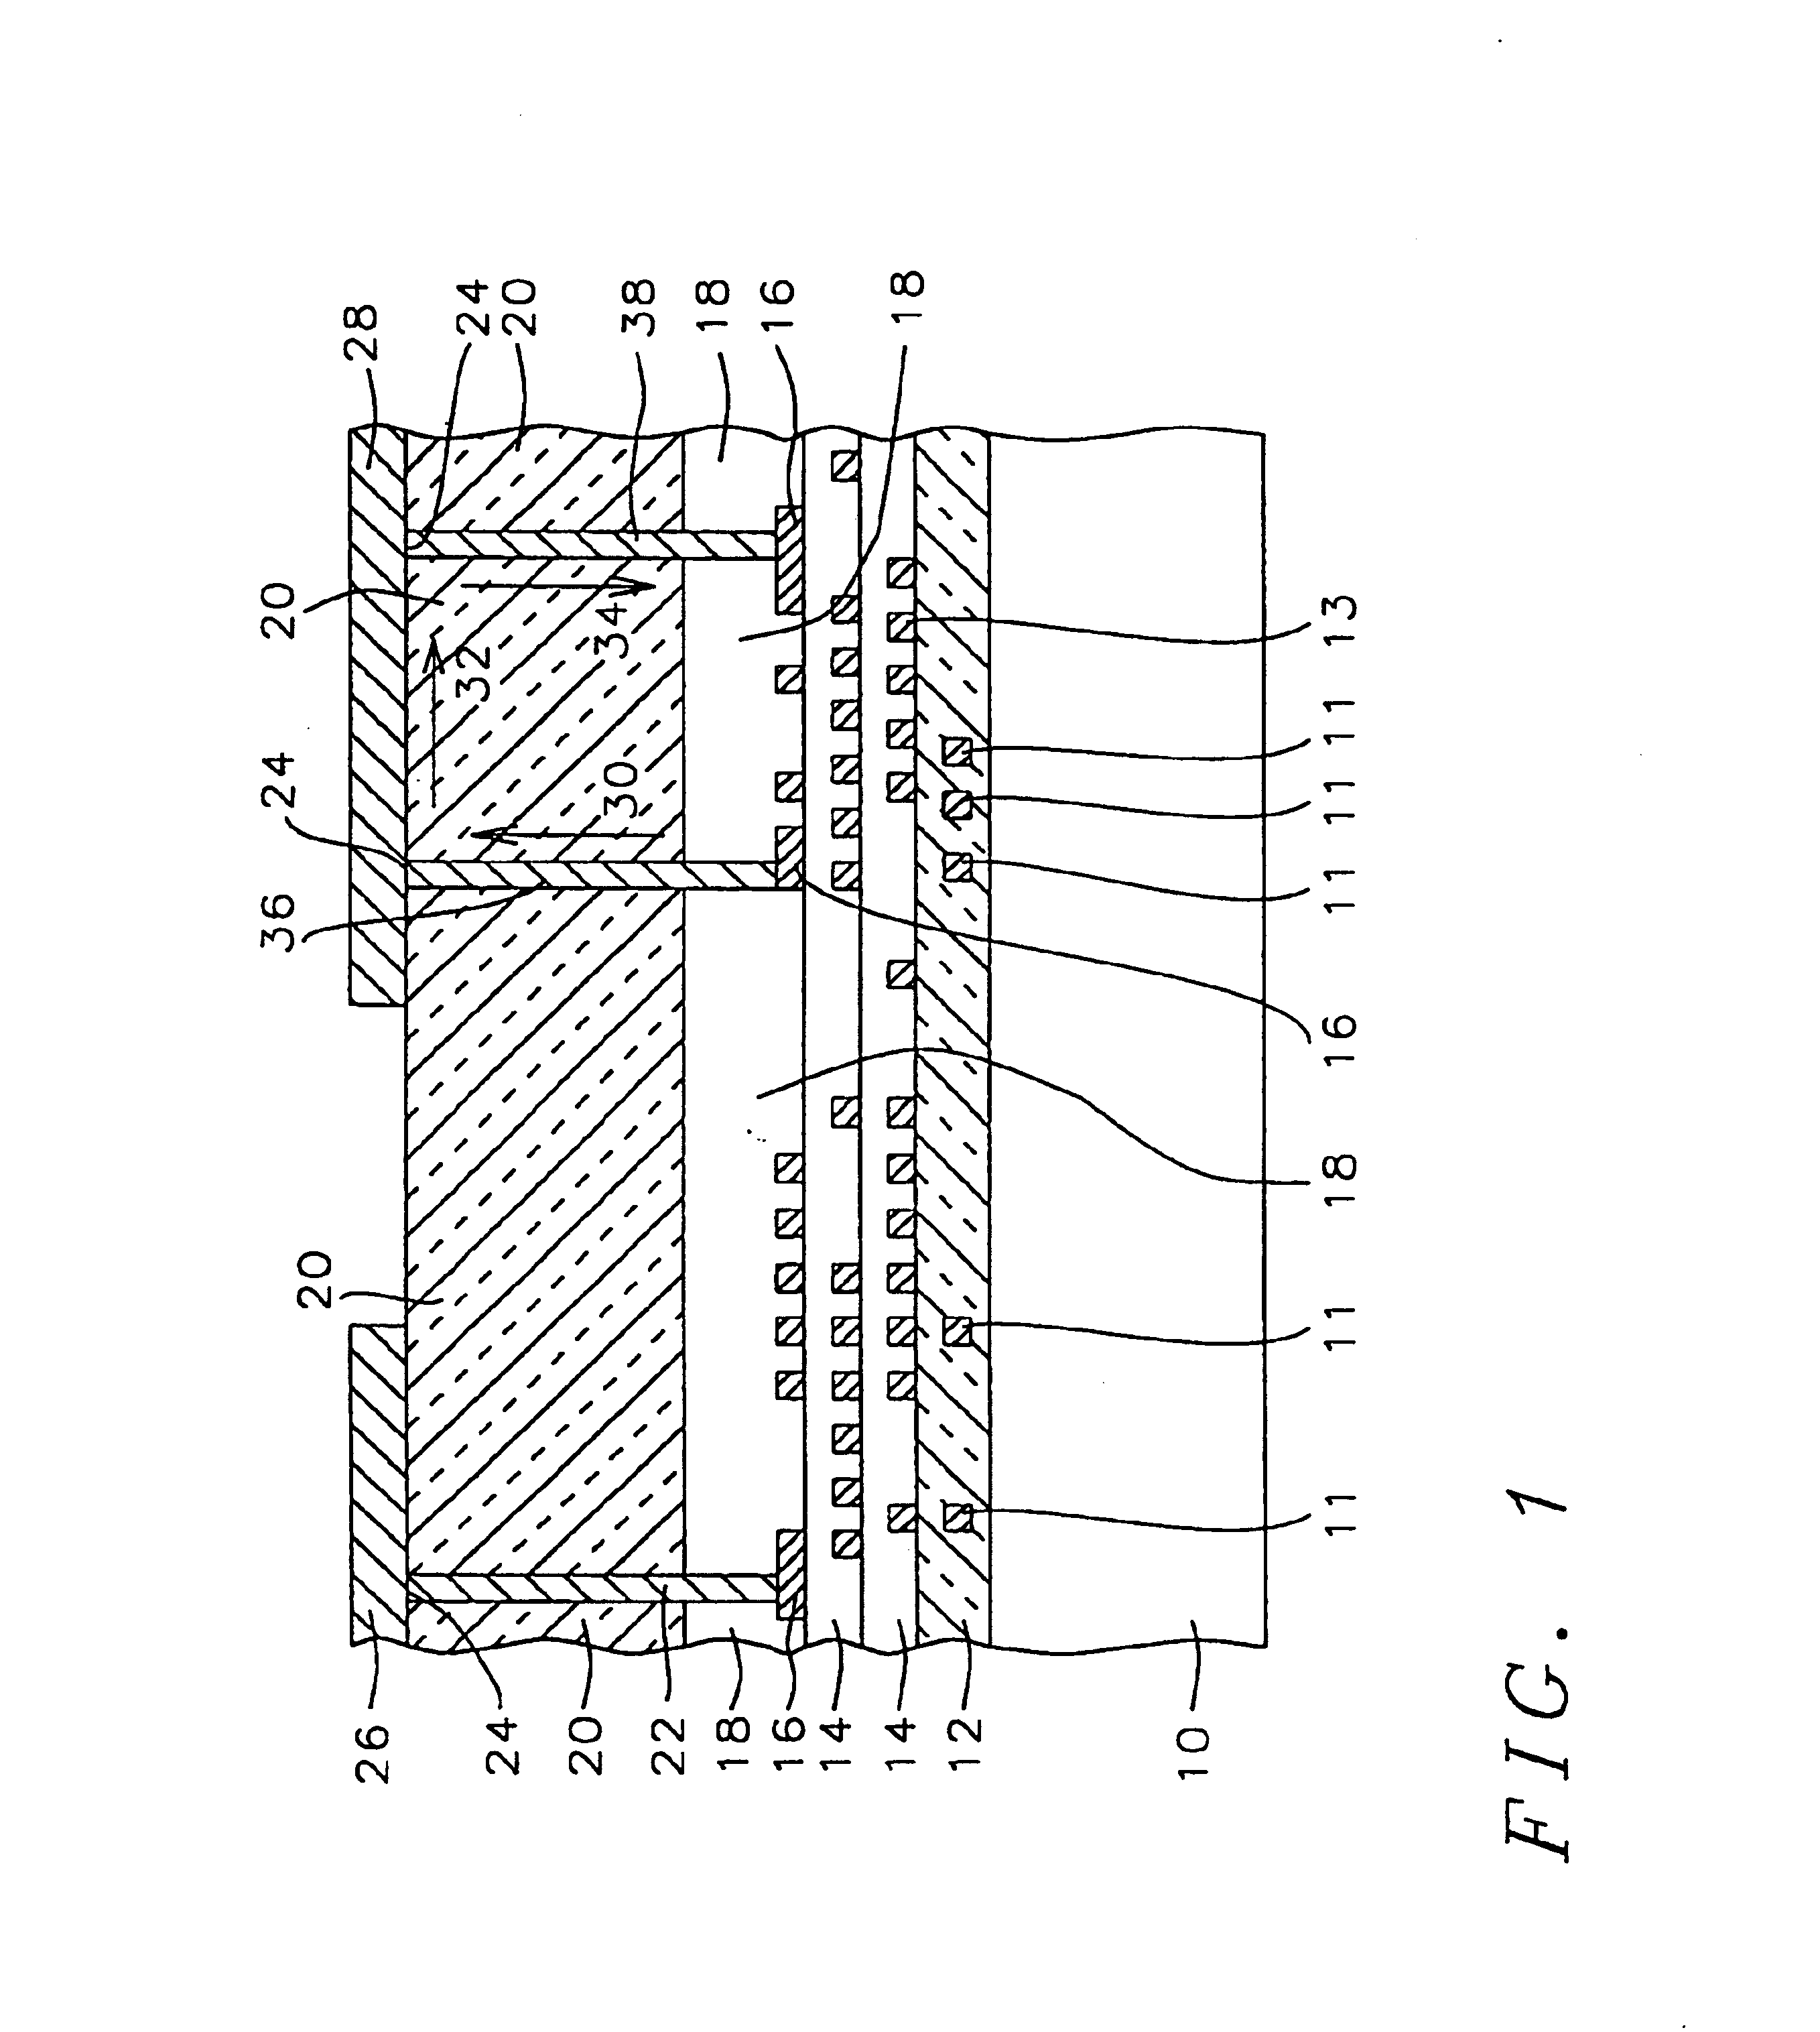 Capacitor for high performance system-on-chip using post passivation device